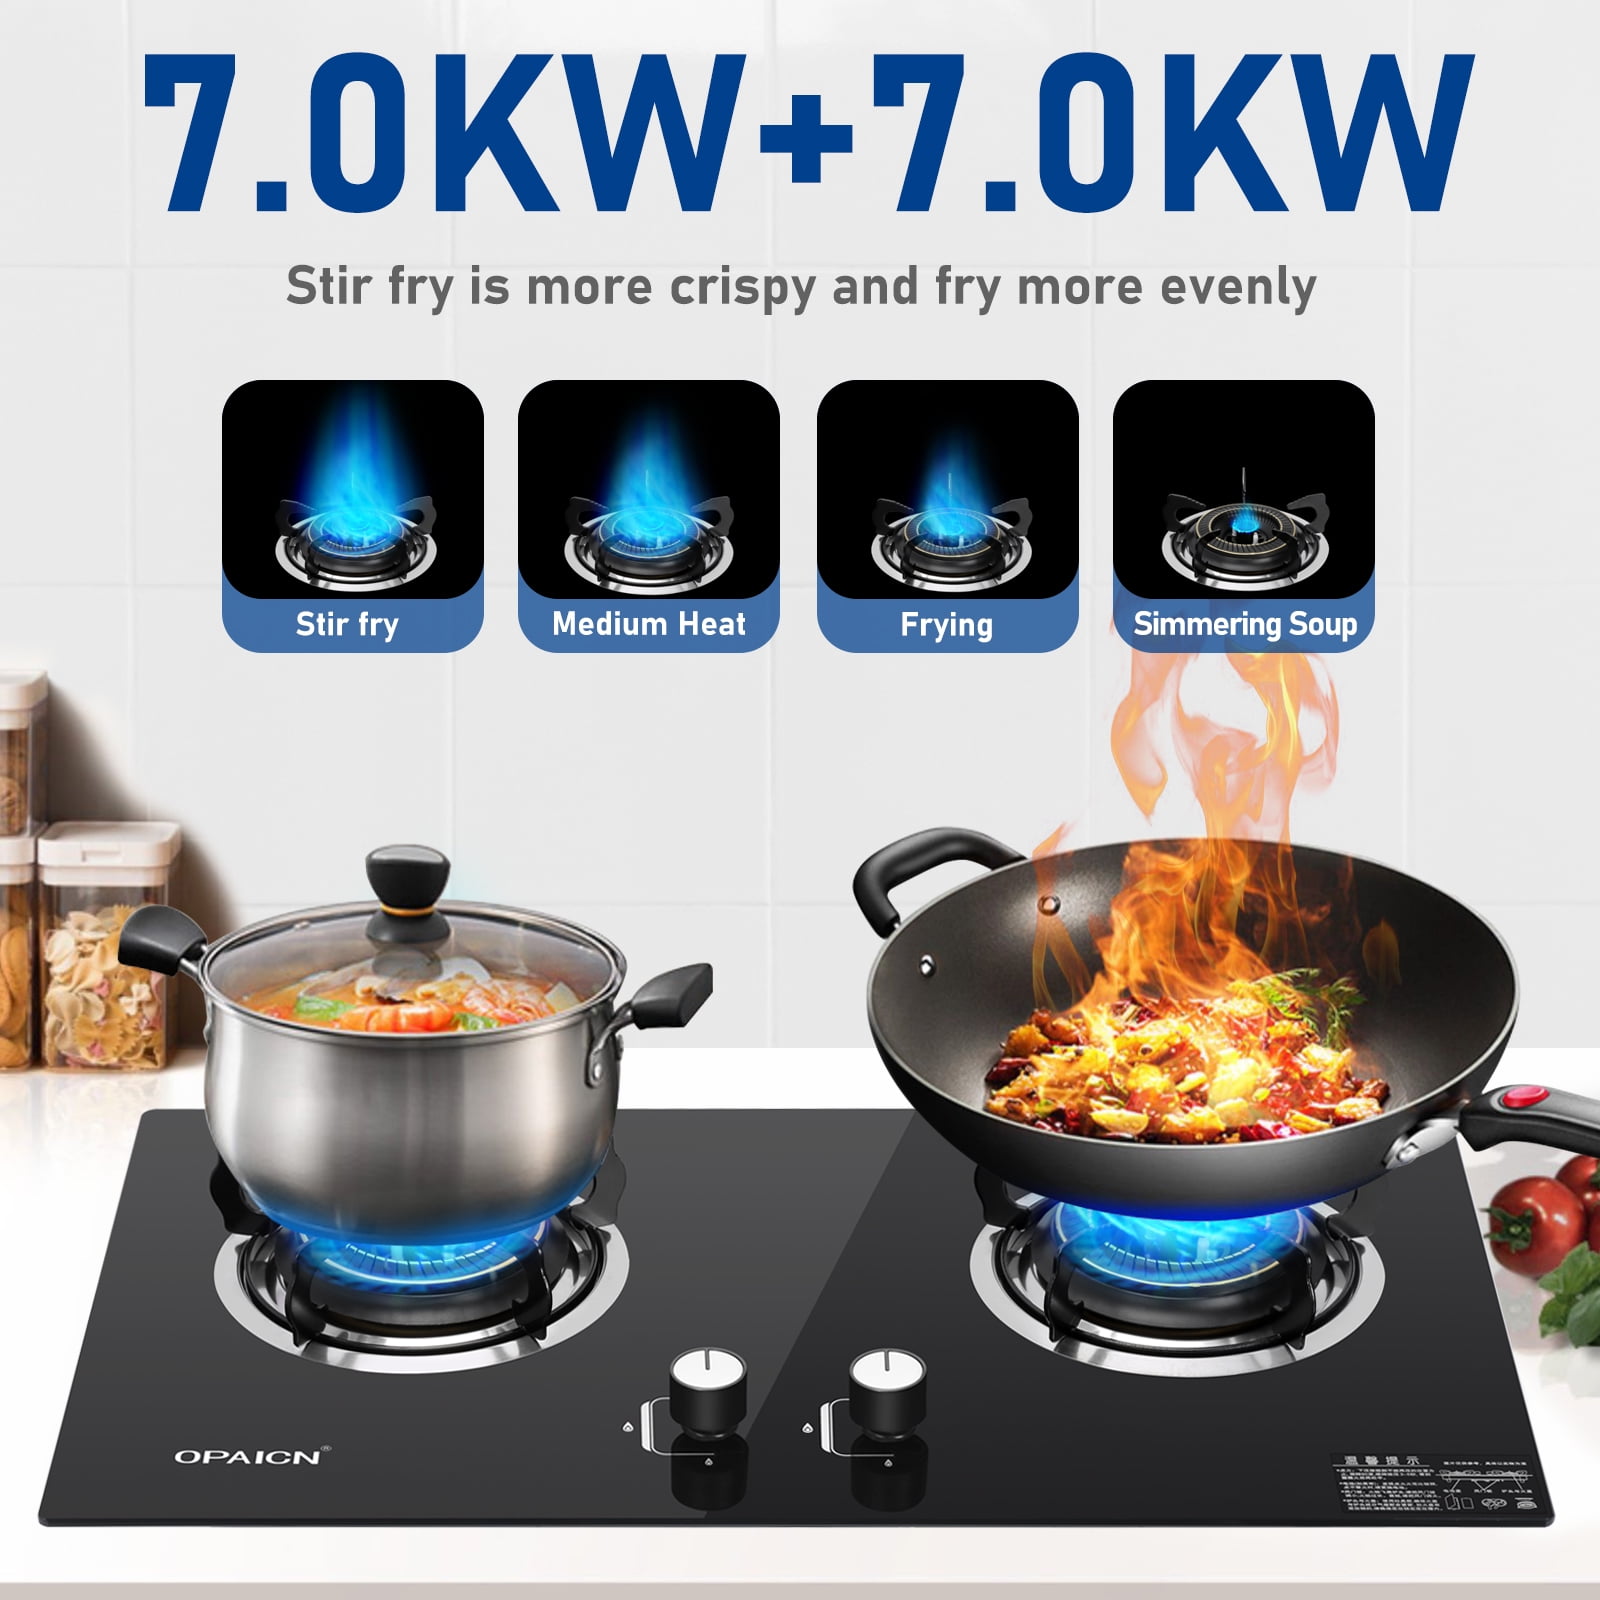 Household Built-in Electric Stove 2 Burner Kitchen Cooktop Table Gas Cooker  Liquefied Gas Stove Energy Saving Home Cooking Gas